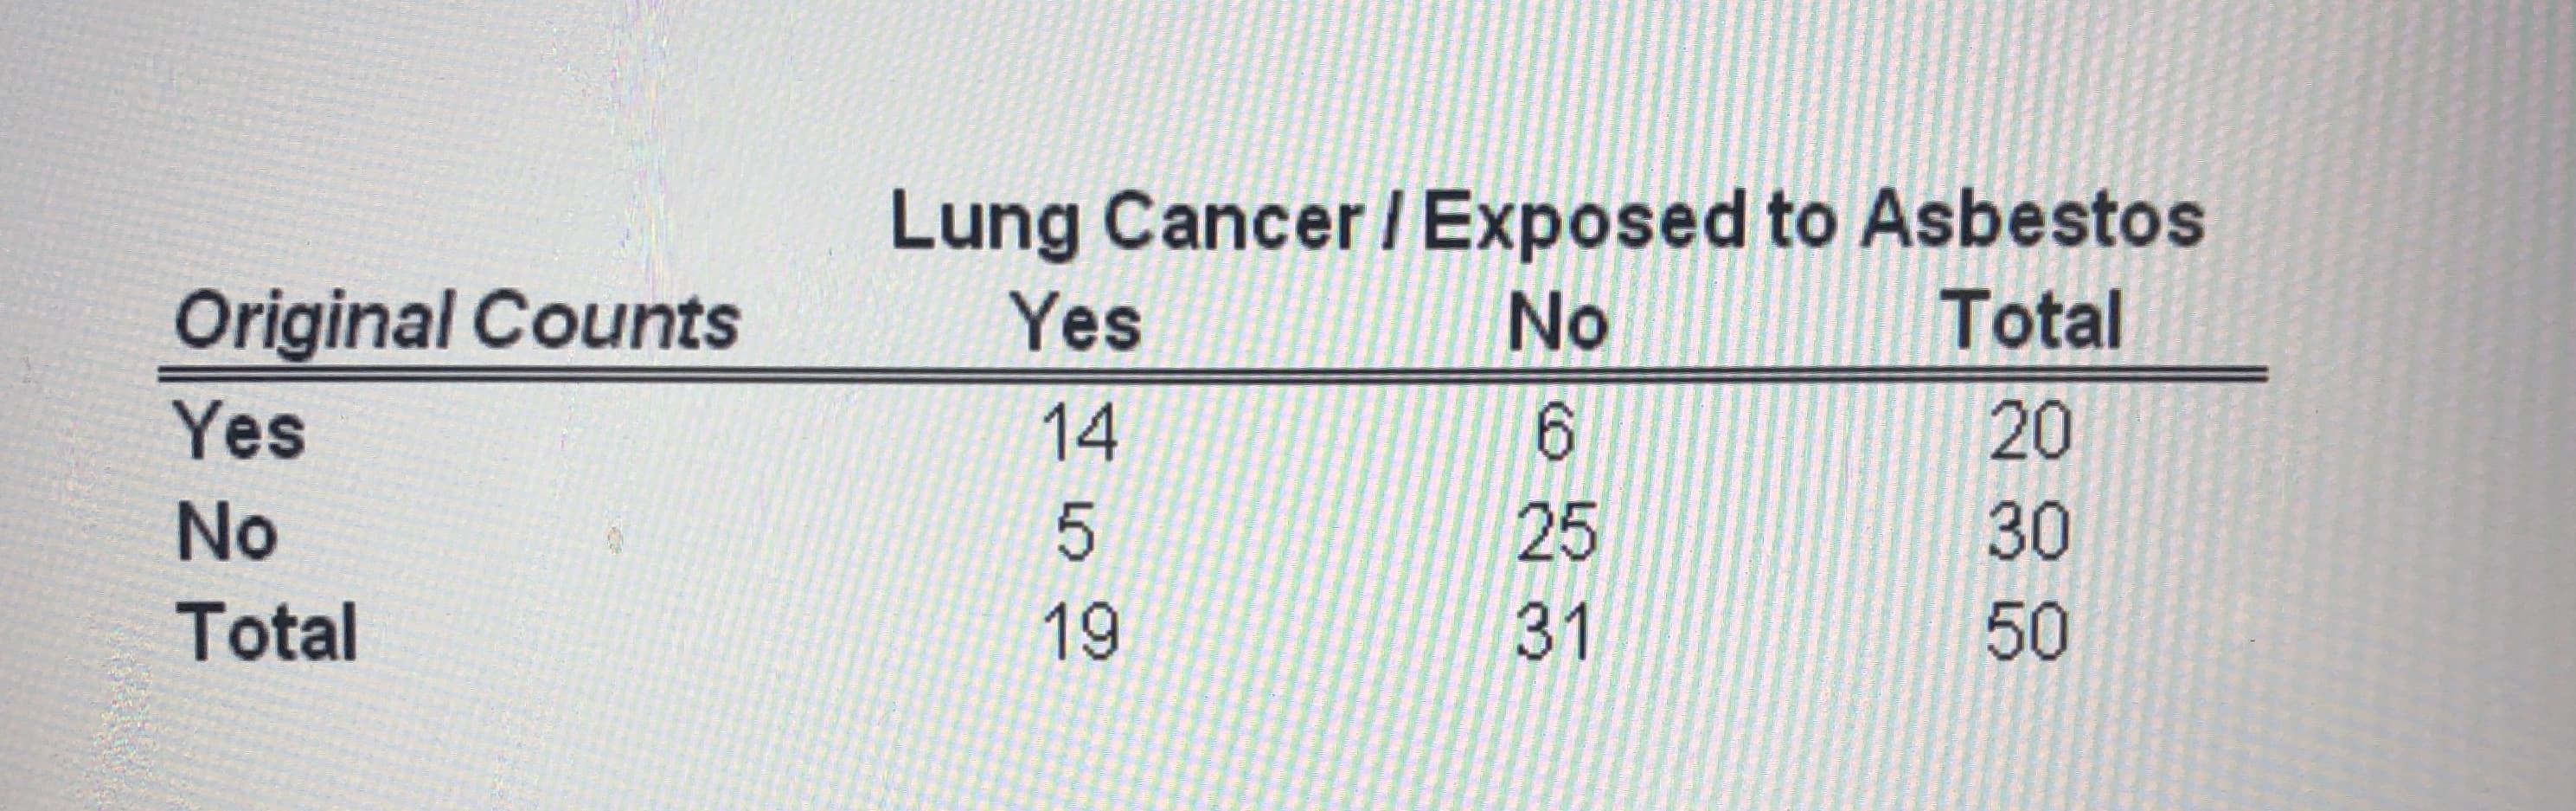 Lung Cancer I Exposed to Asbestos
Original Counts
Total
Yes
No
Yes
20
14
6.
25
30
No
19
50
31
Total
